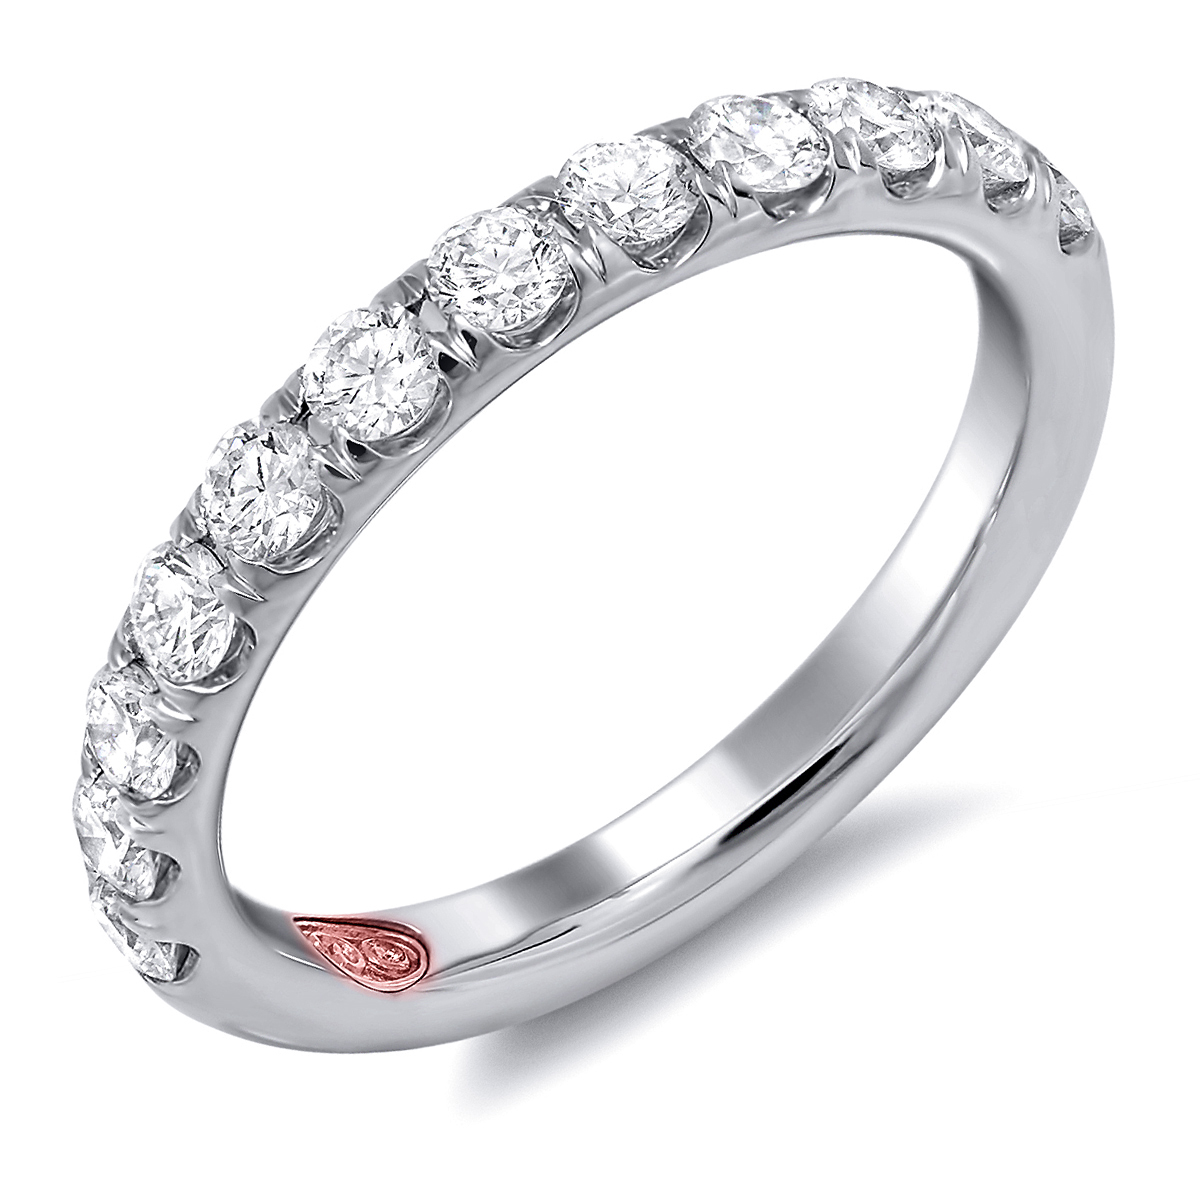 jewelry rings designer engagement jewelry and rings - demarco bridal jewelry hjhmrgg